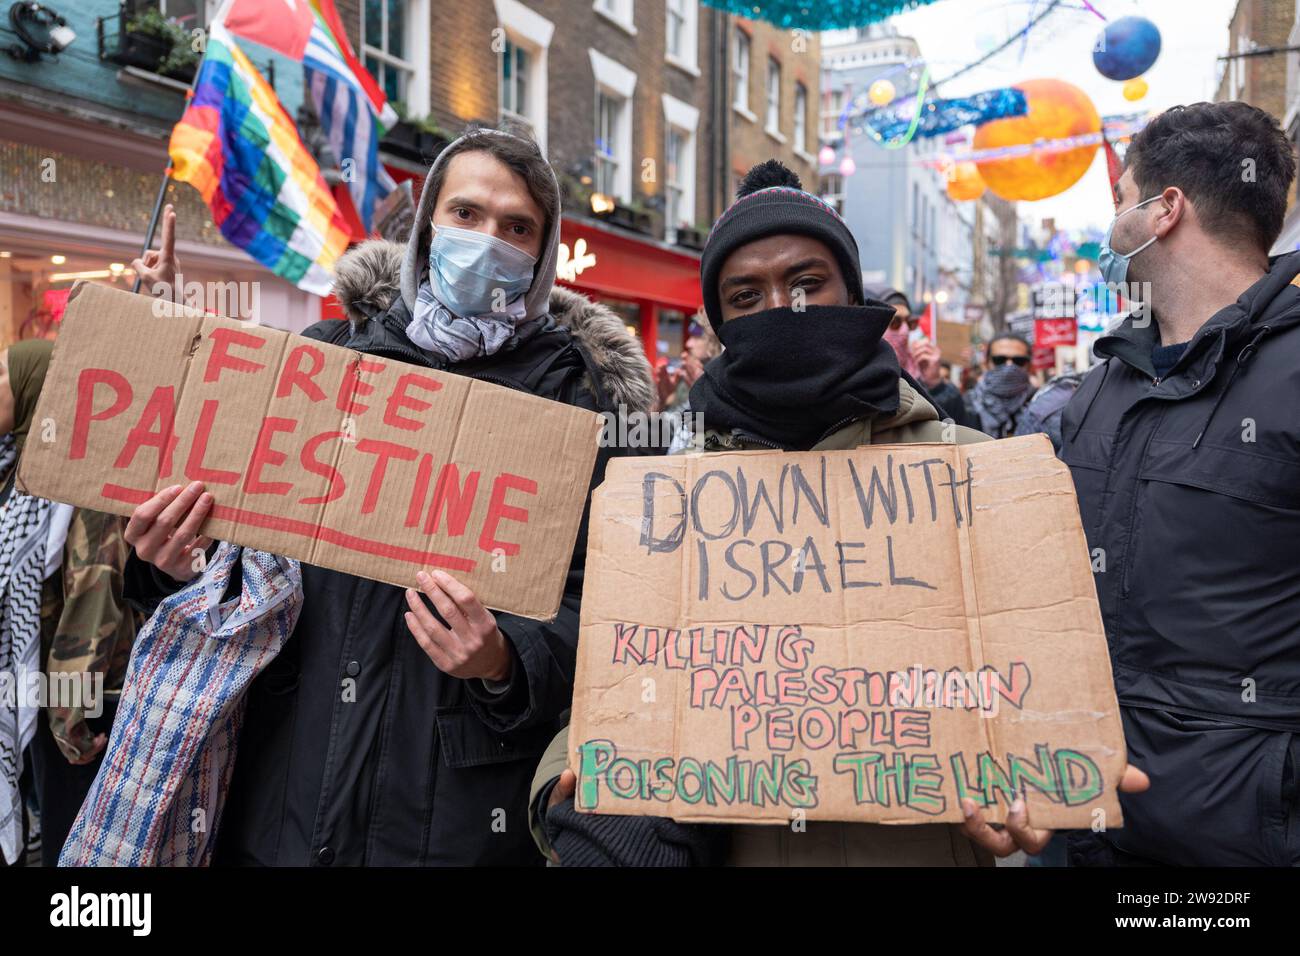 London / UK  23 DEC 2023. Hundreds of people demonstrated in Carnaby street in London, calling for an immediate ceasefire in Gaza and a boycott of “Israel-linked” brands. Aubrey Fagon / Alamy Live News Stock Photo